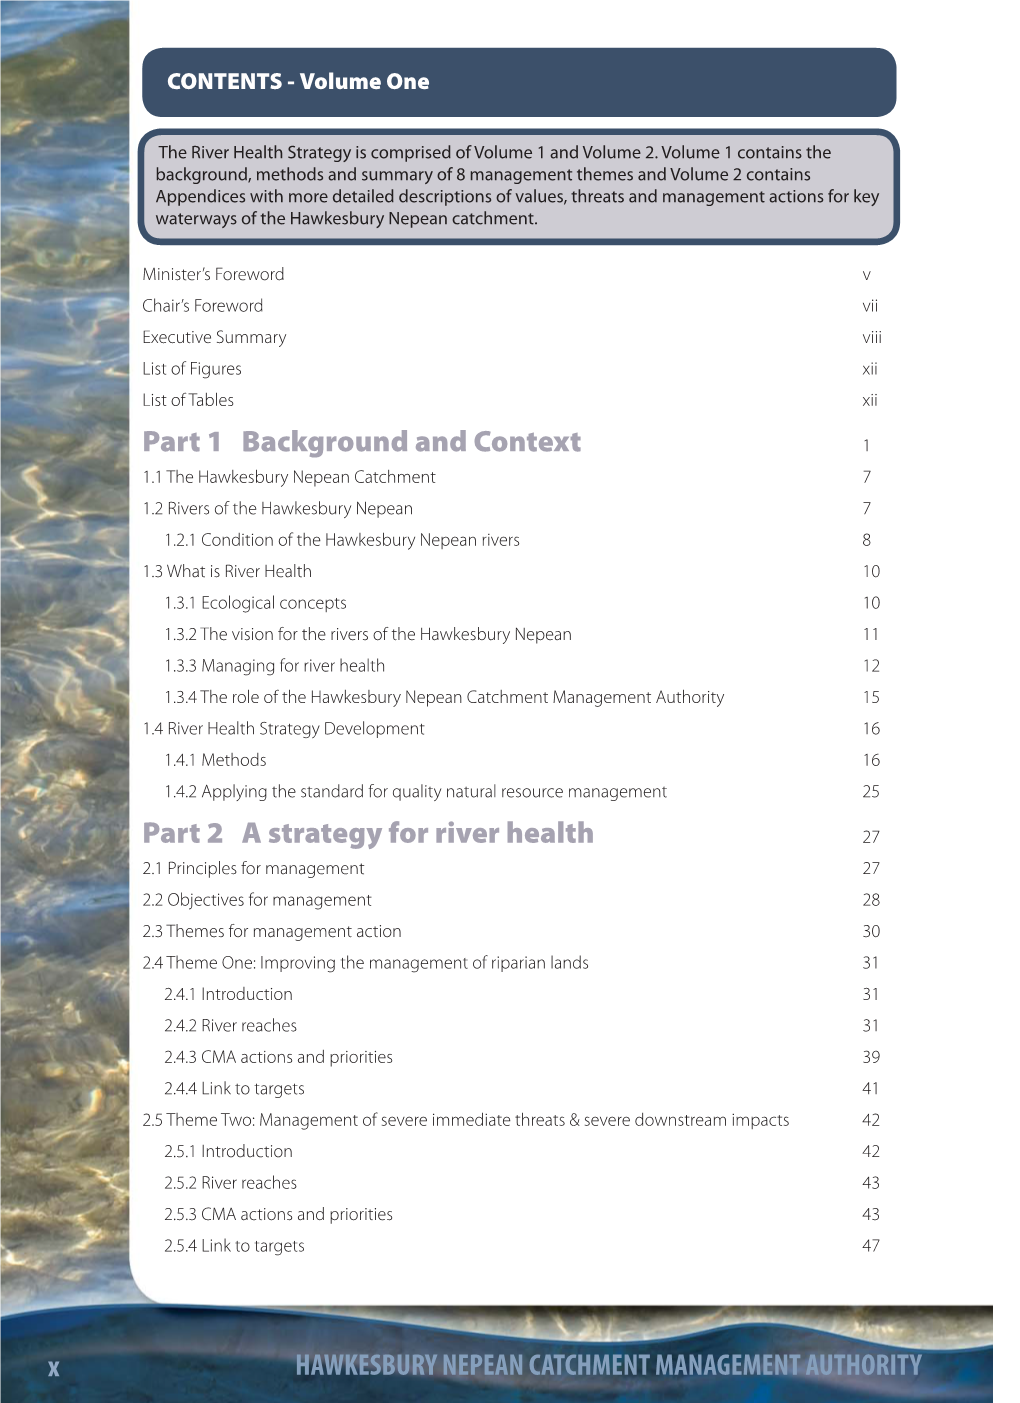 Hawkesbury Nepean River Health Strategy Contents